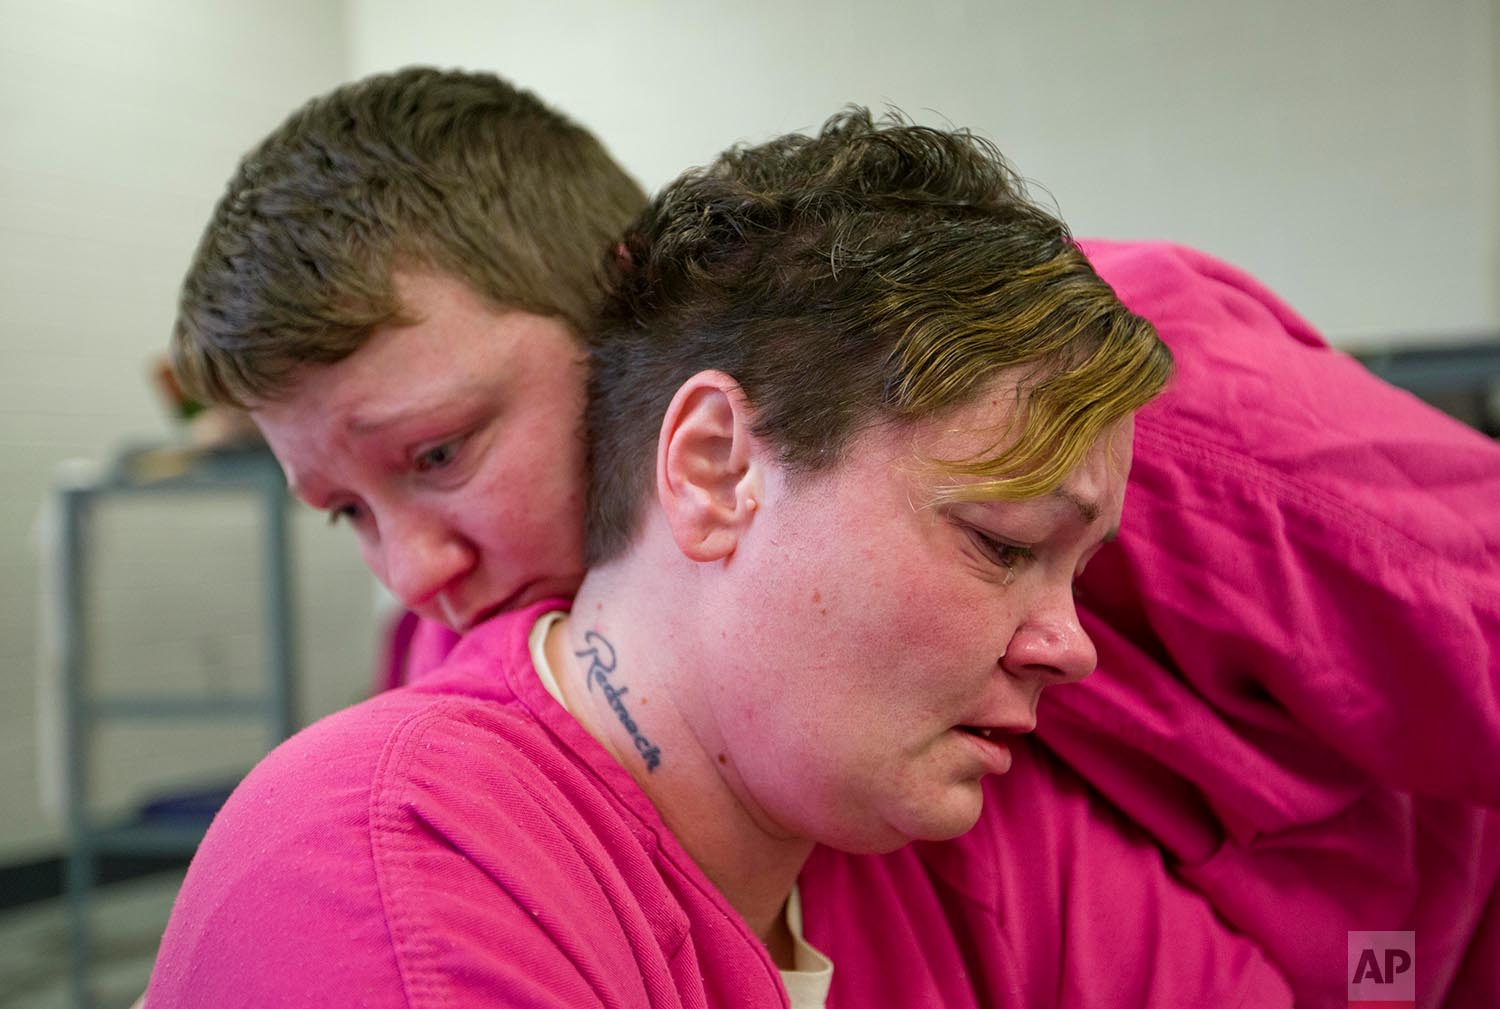  Mary Sammons, foreground, is comforted in the Campbell County Jail in Jacksboro, Tenn., Wednesday, March 28, 2018, by cellmate Blanche Ball, days after Sammons learned that her 20-year-old son was murdered in Kentucky. (AP Photo/David Goldman) 